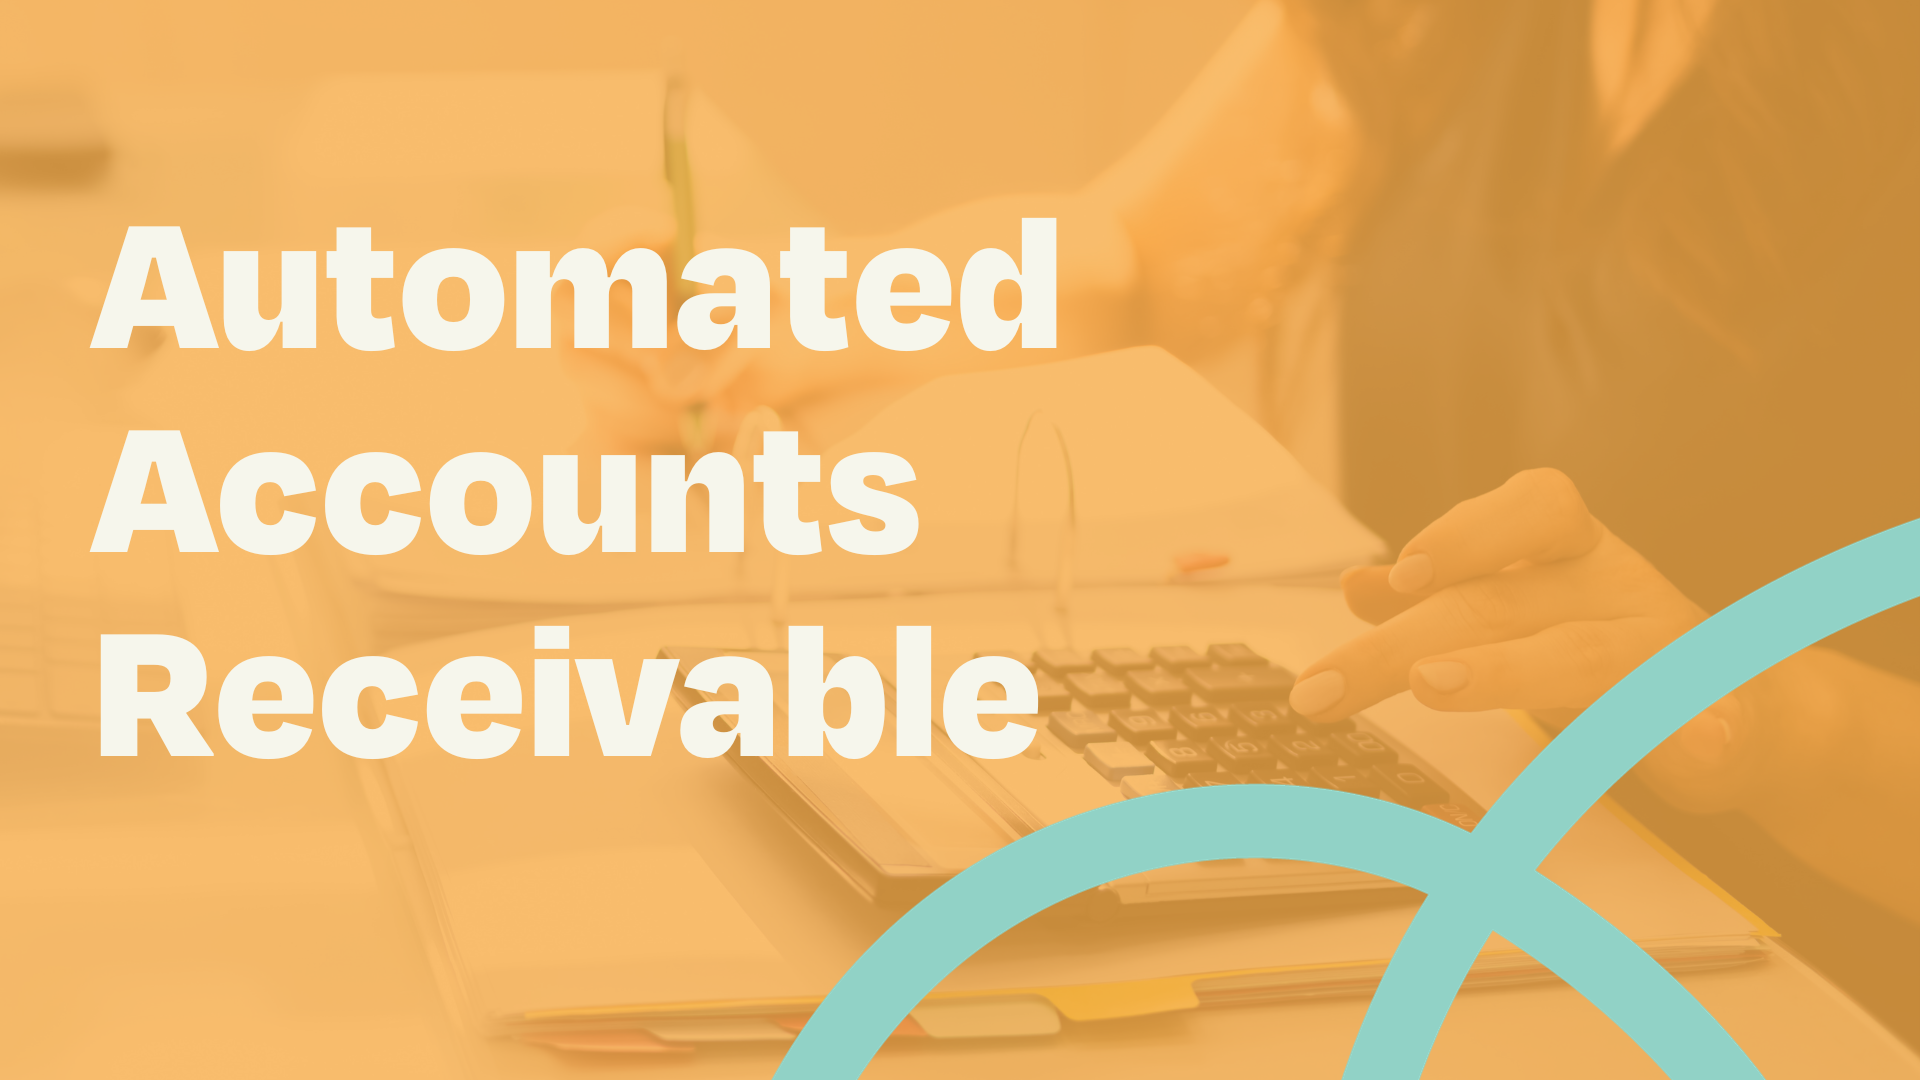 Automate Accounts Receivable for Increased Productivity